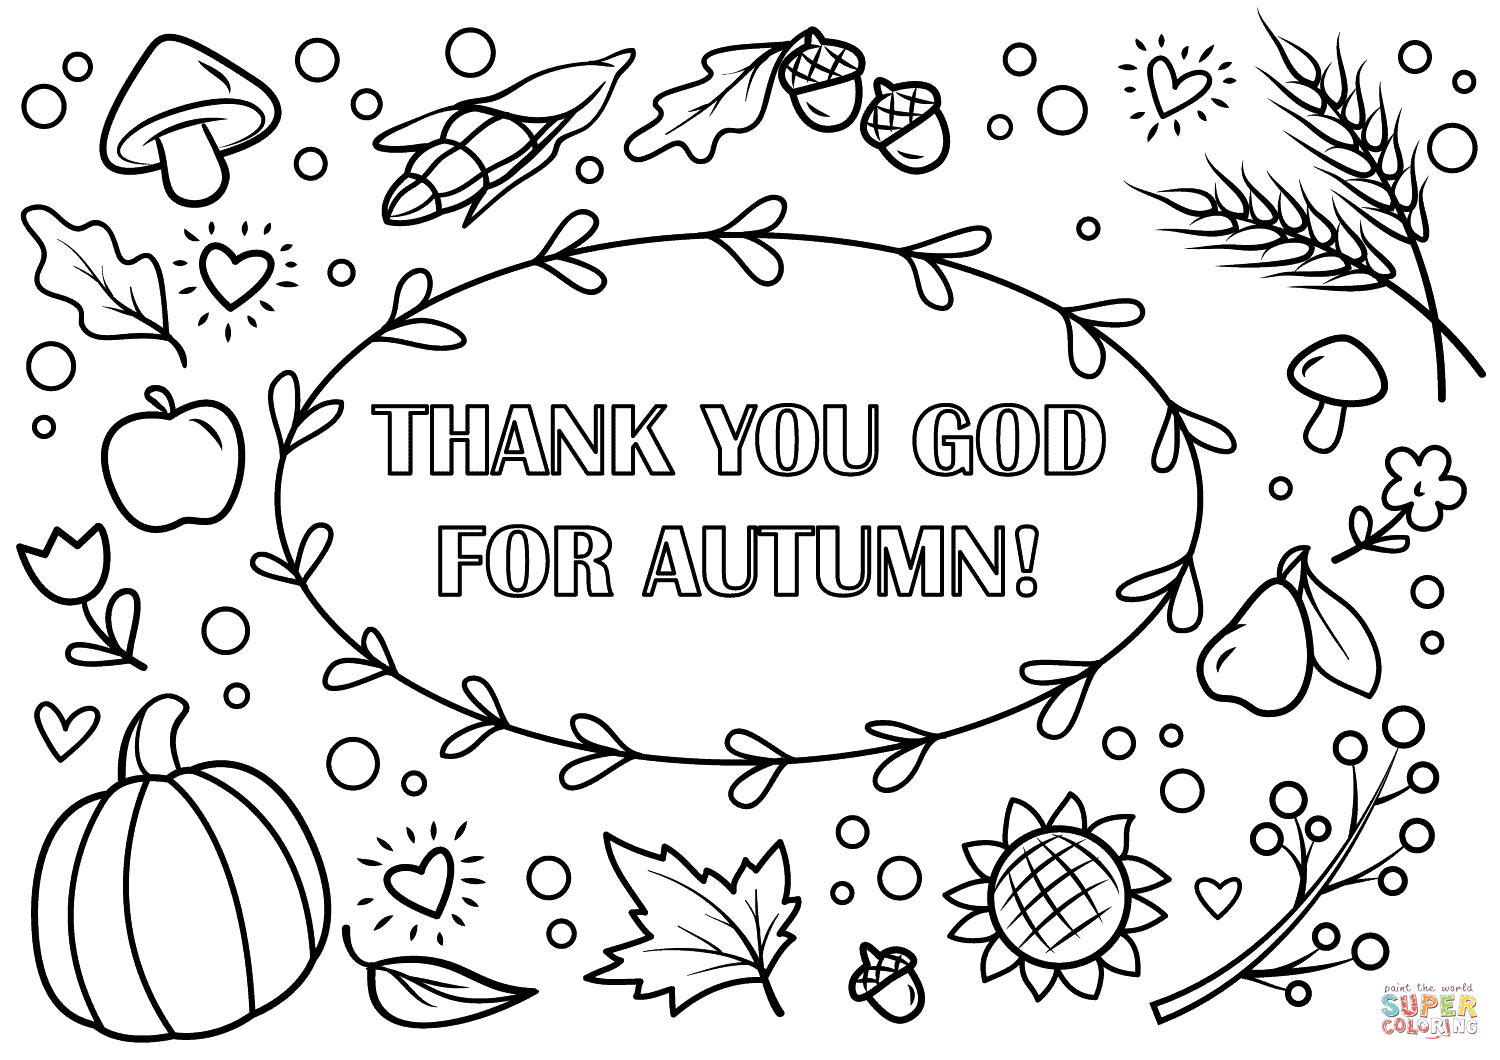 Thank You God For Autumn! Coloring Page | Free Printable Coloring Pages - Free Printable Autumn Coloring Sheets